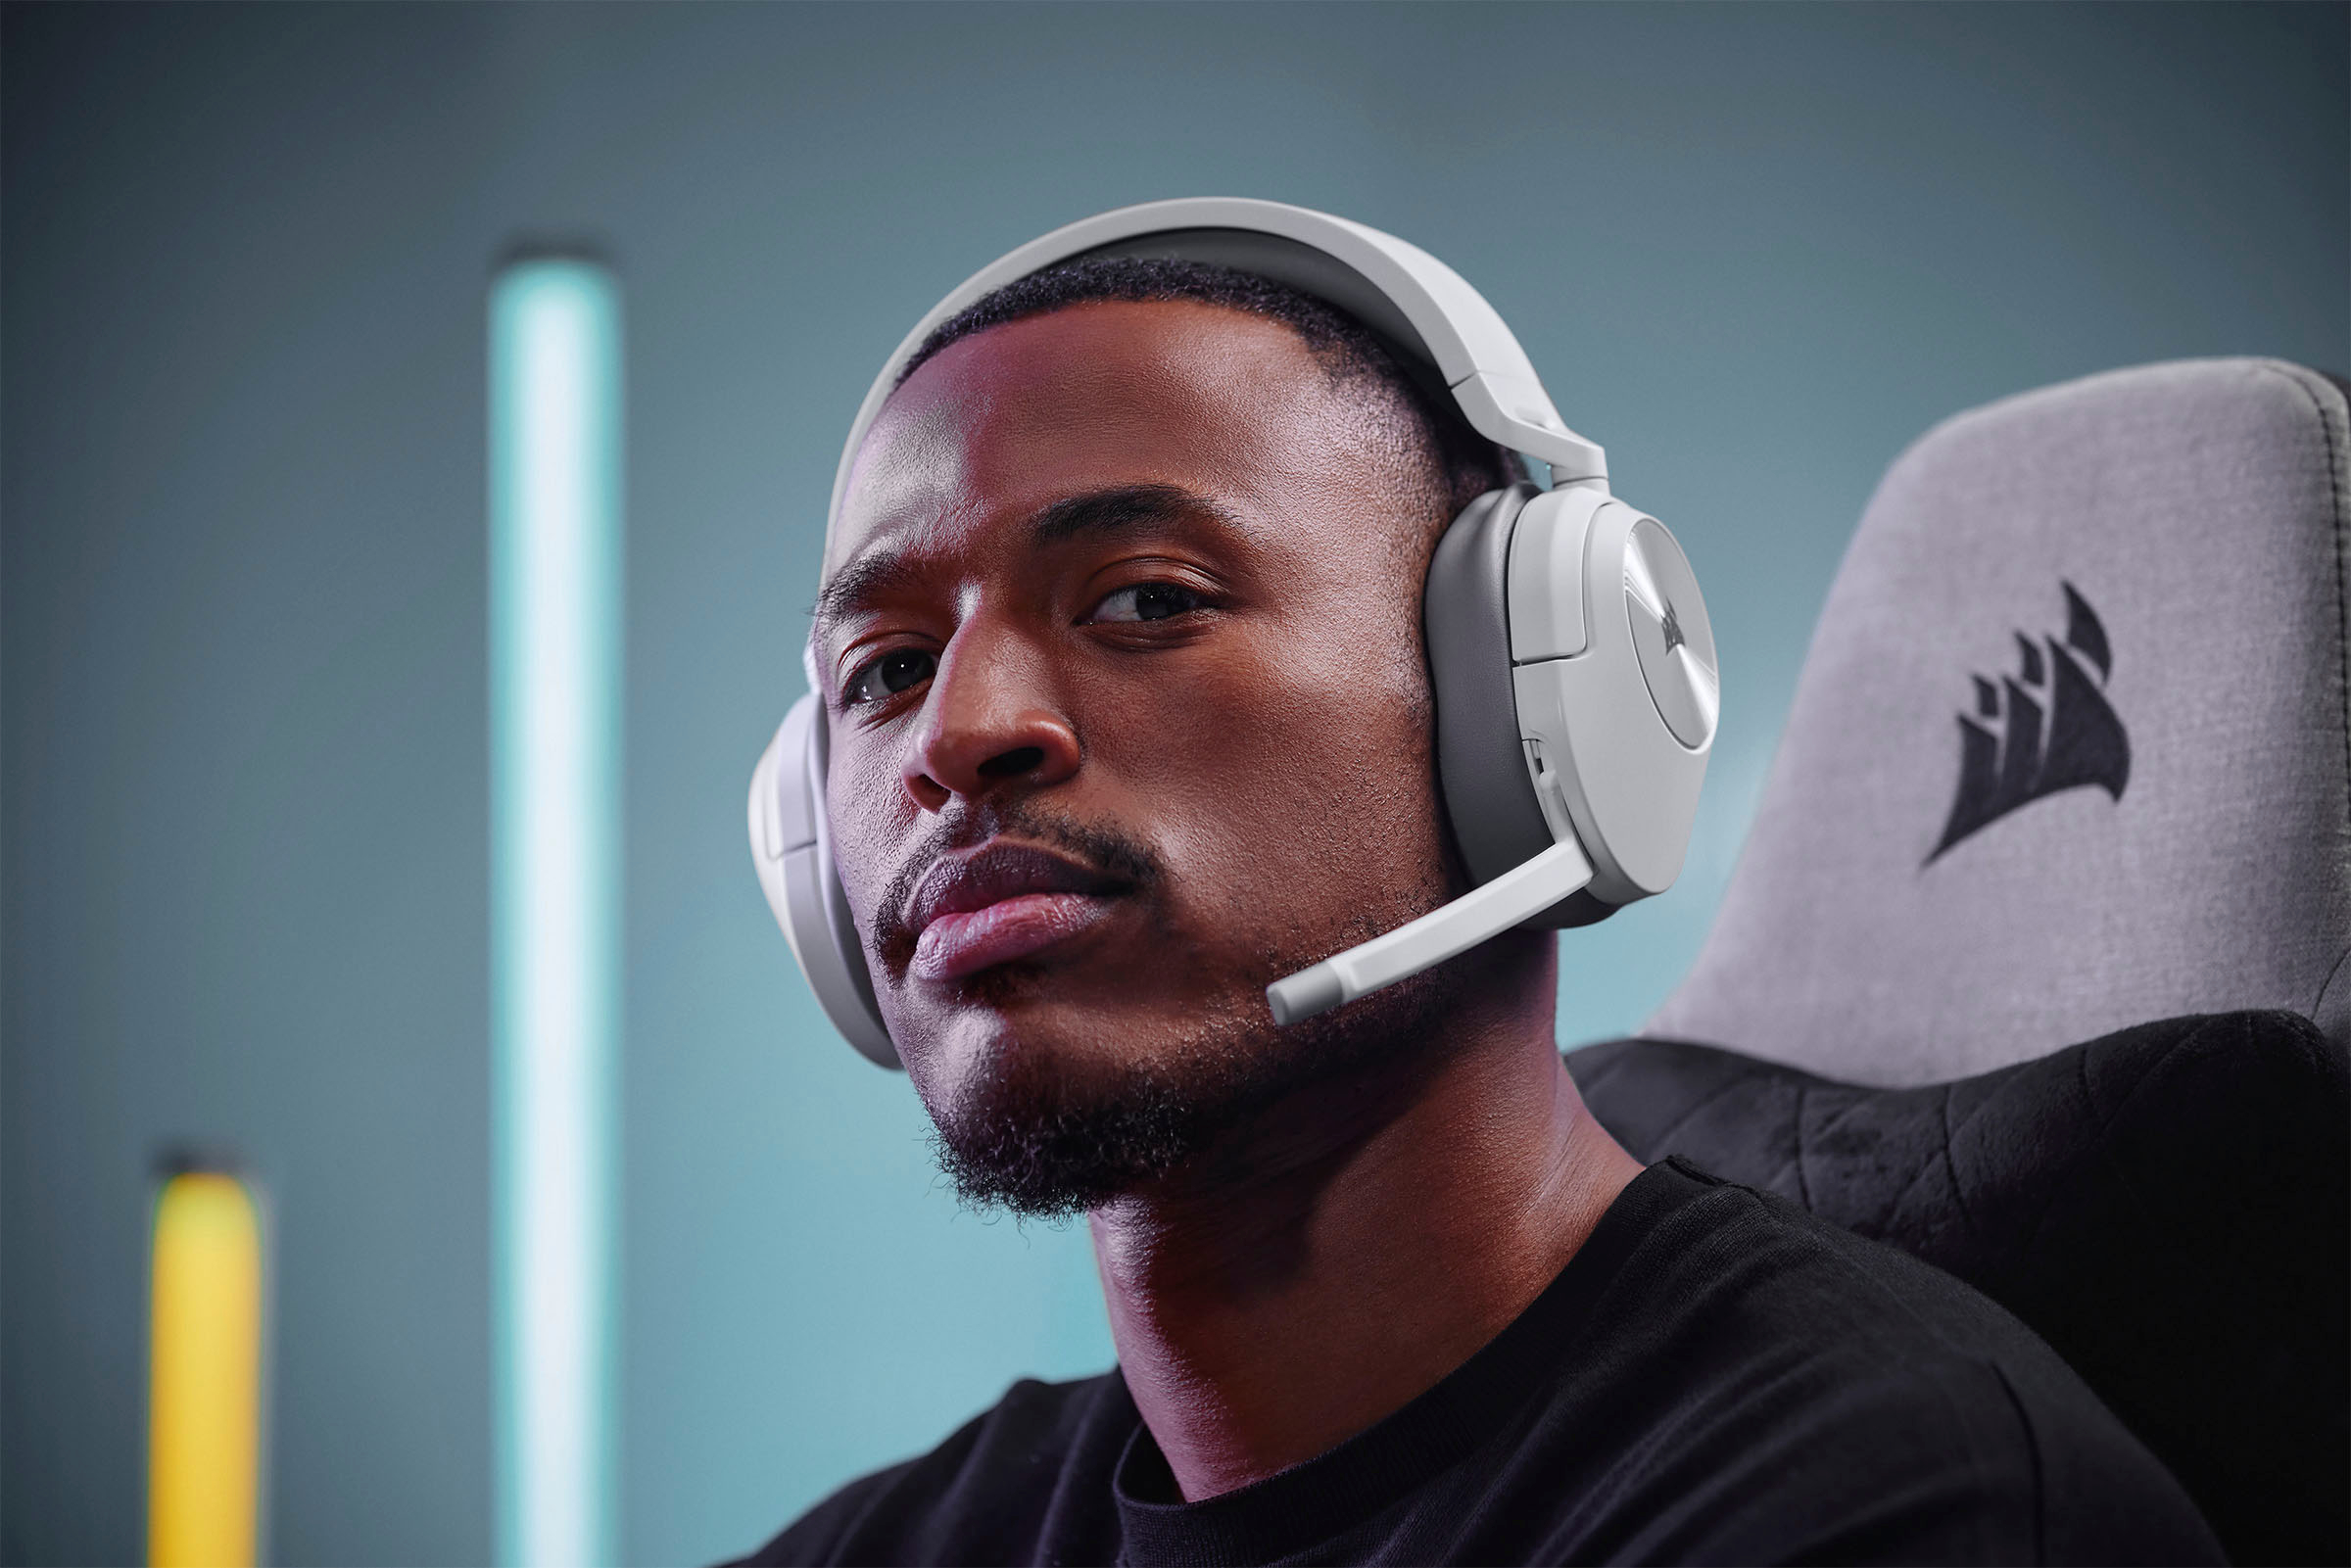 CORSAIR HS55 Stereo Gaming Headset, Multi-Platform Compatible (PC, Mac,  PS5/PS4, Xbox Series X, and Switch)